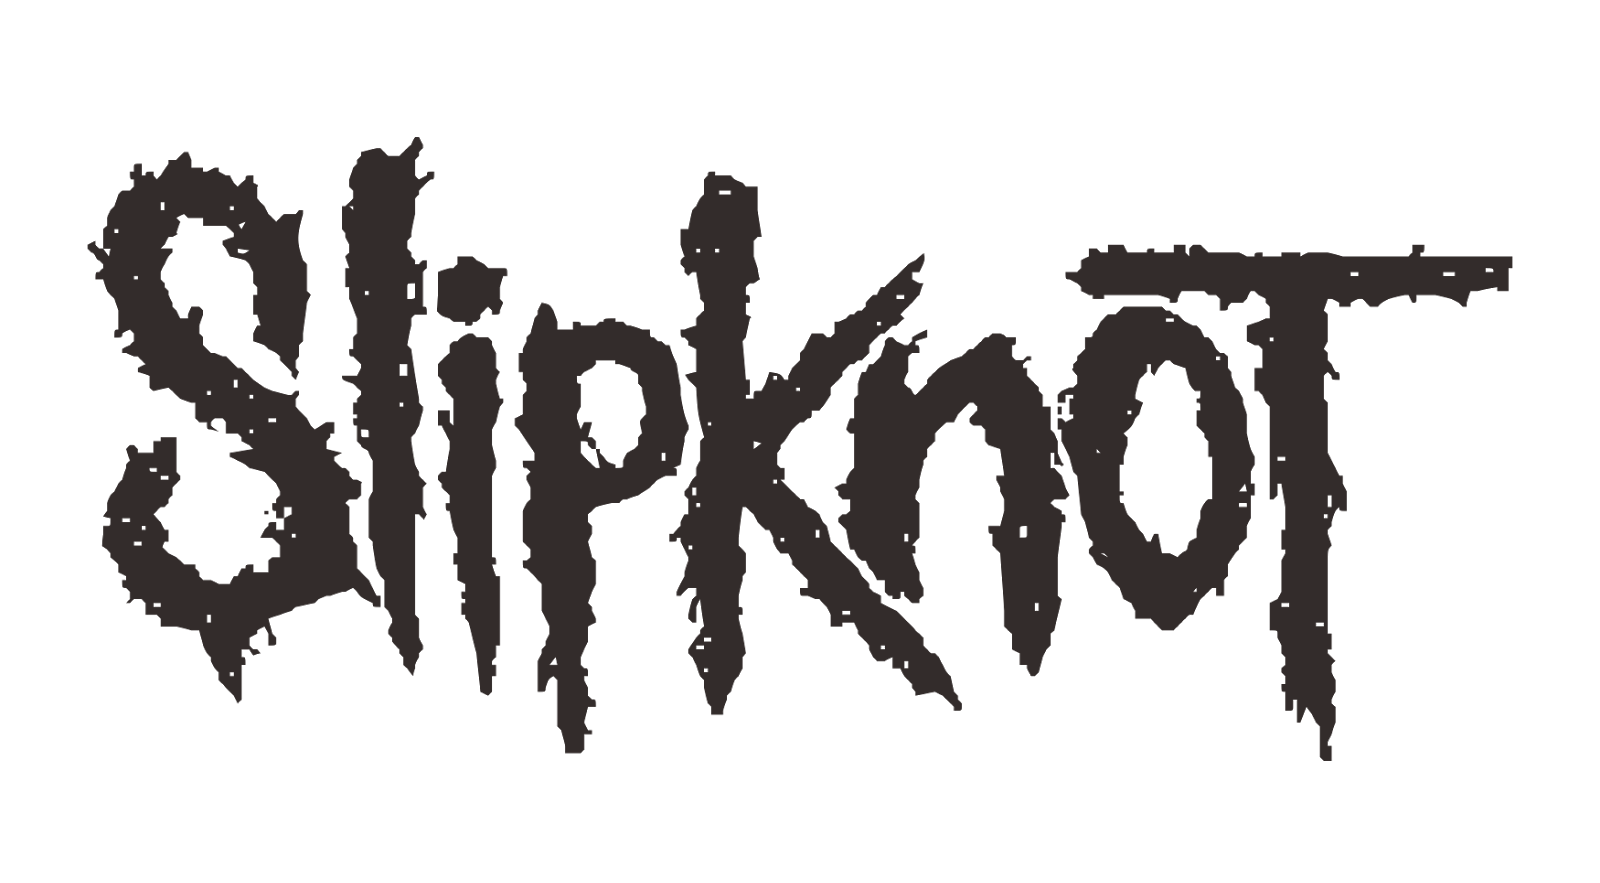 Slipknot Logo - Slipknot Logo, Slipknot Symbol, Meaning, History and Evolution